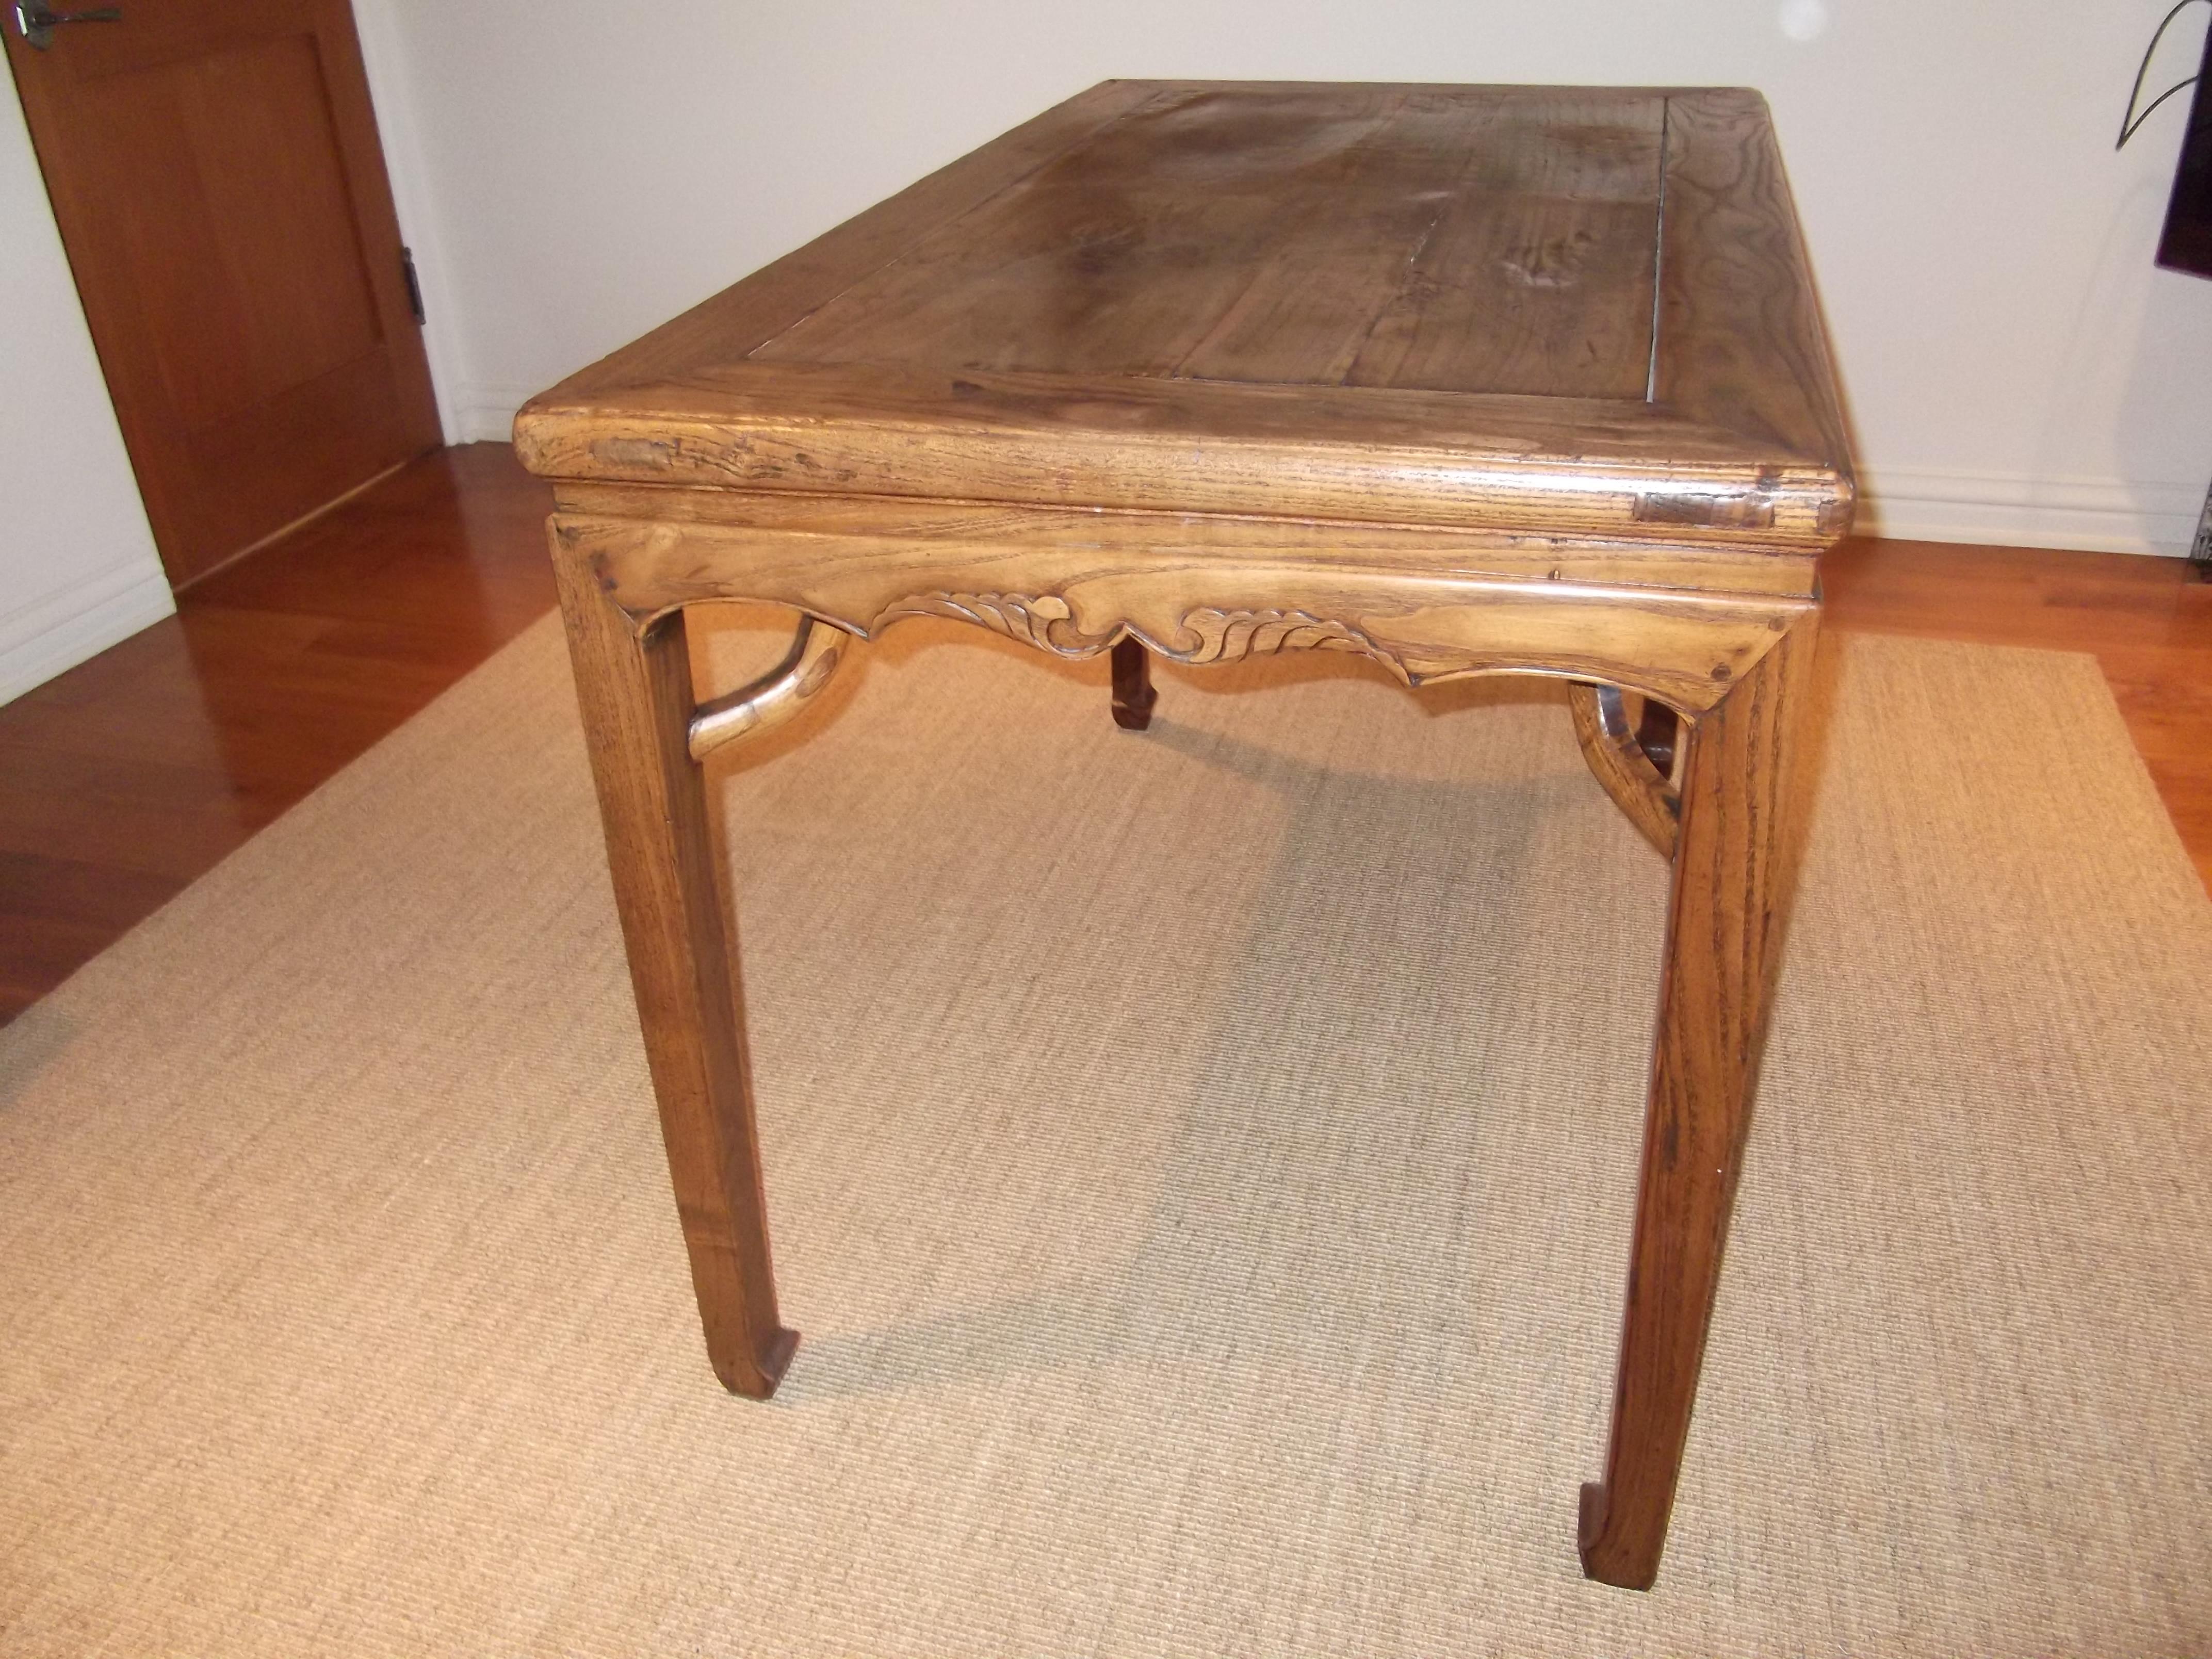 This is a rectangular painting table with ice plate edge frame member molding, supporting apron with floral carving, giant arm braces, square legs with beaded edging and inward square horse hoof feet. This table is constructed of mitered mortise and